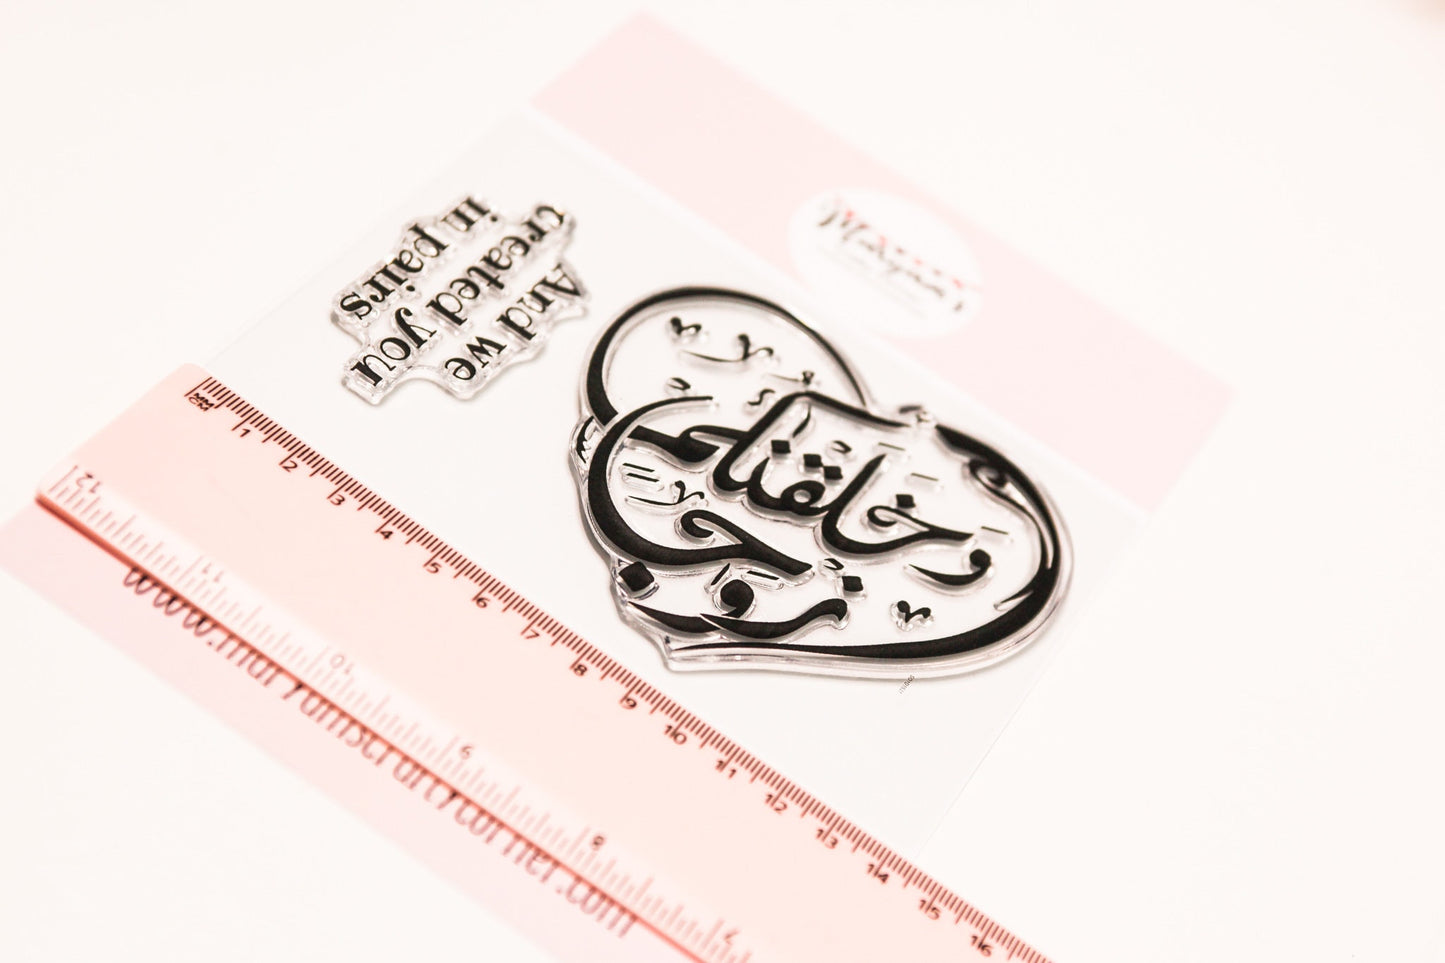 1 very large unmounted Arabic calligraphy stamp, it is good for stamping greeting cards for wedding, stamping and creating your on frame